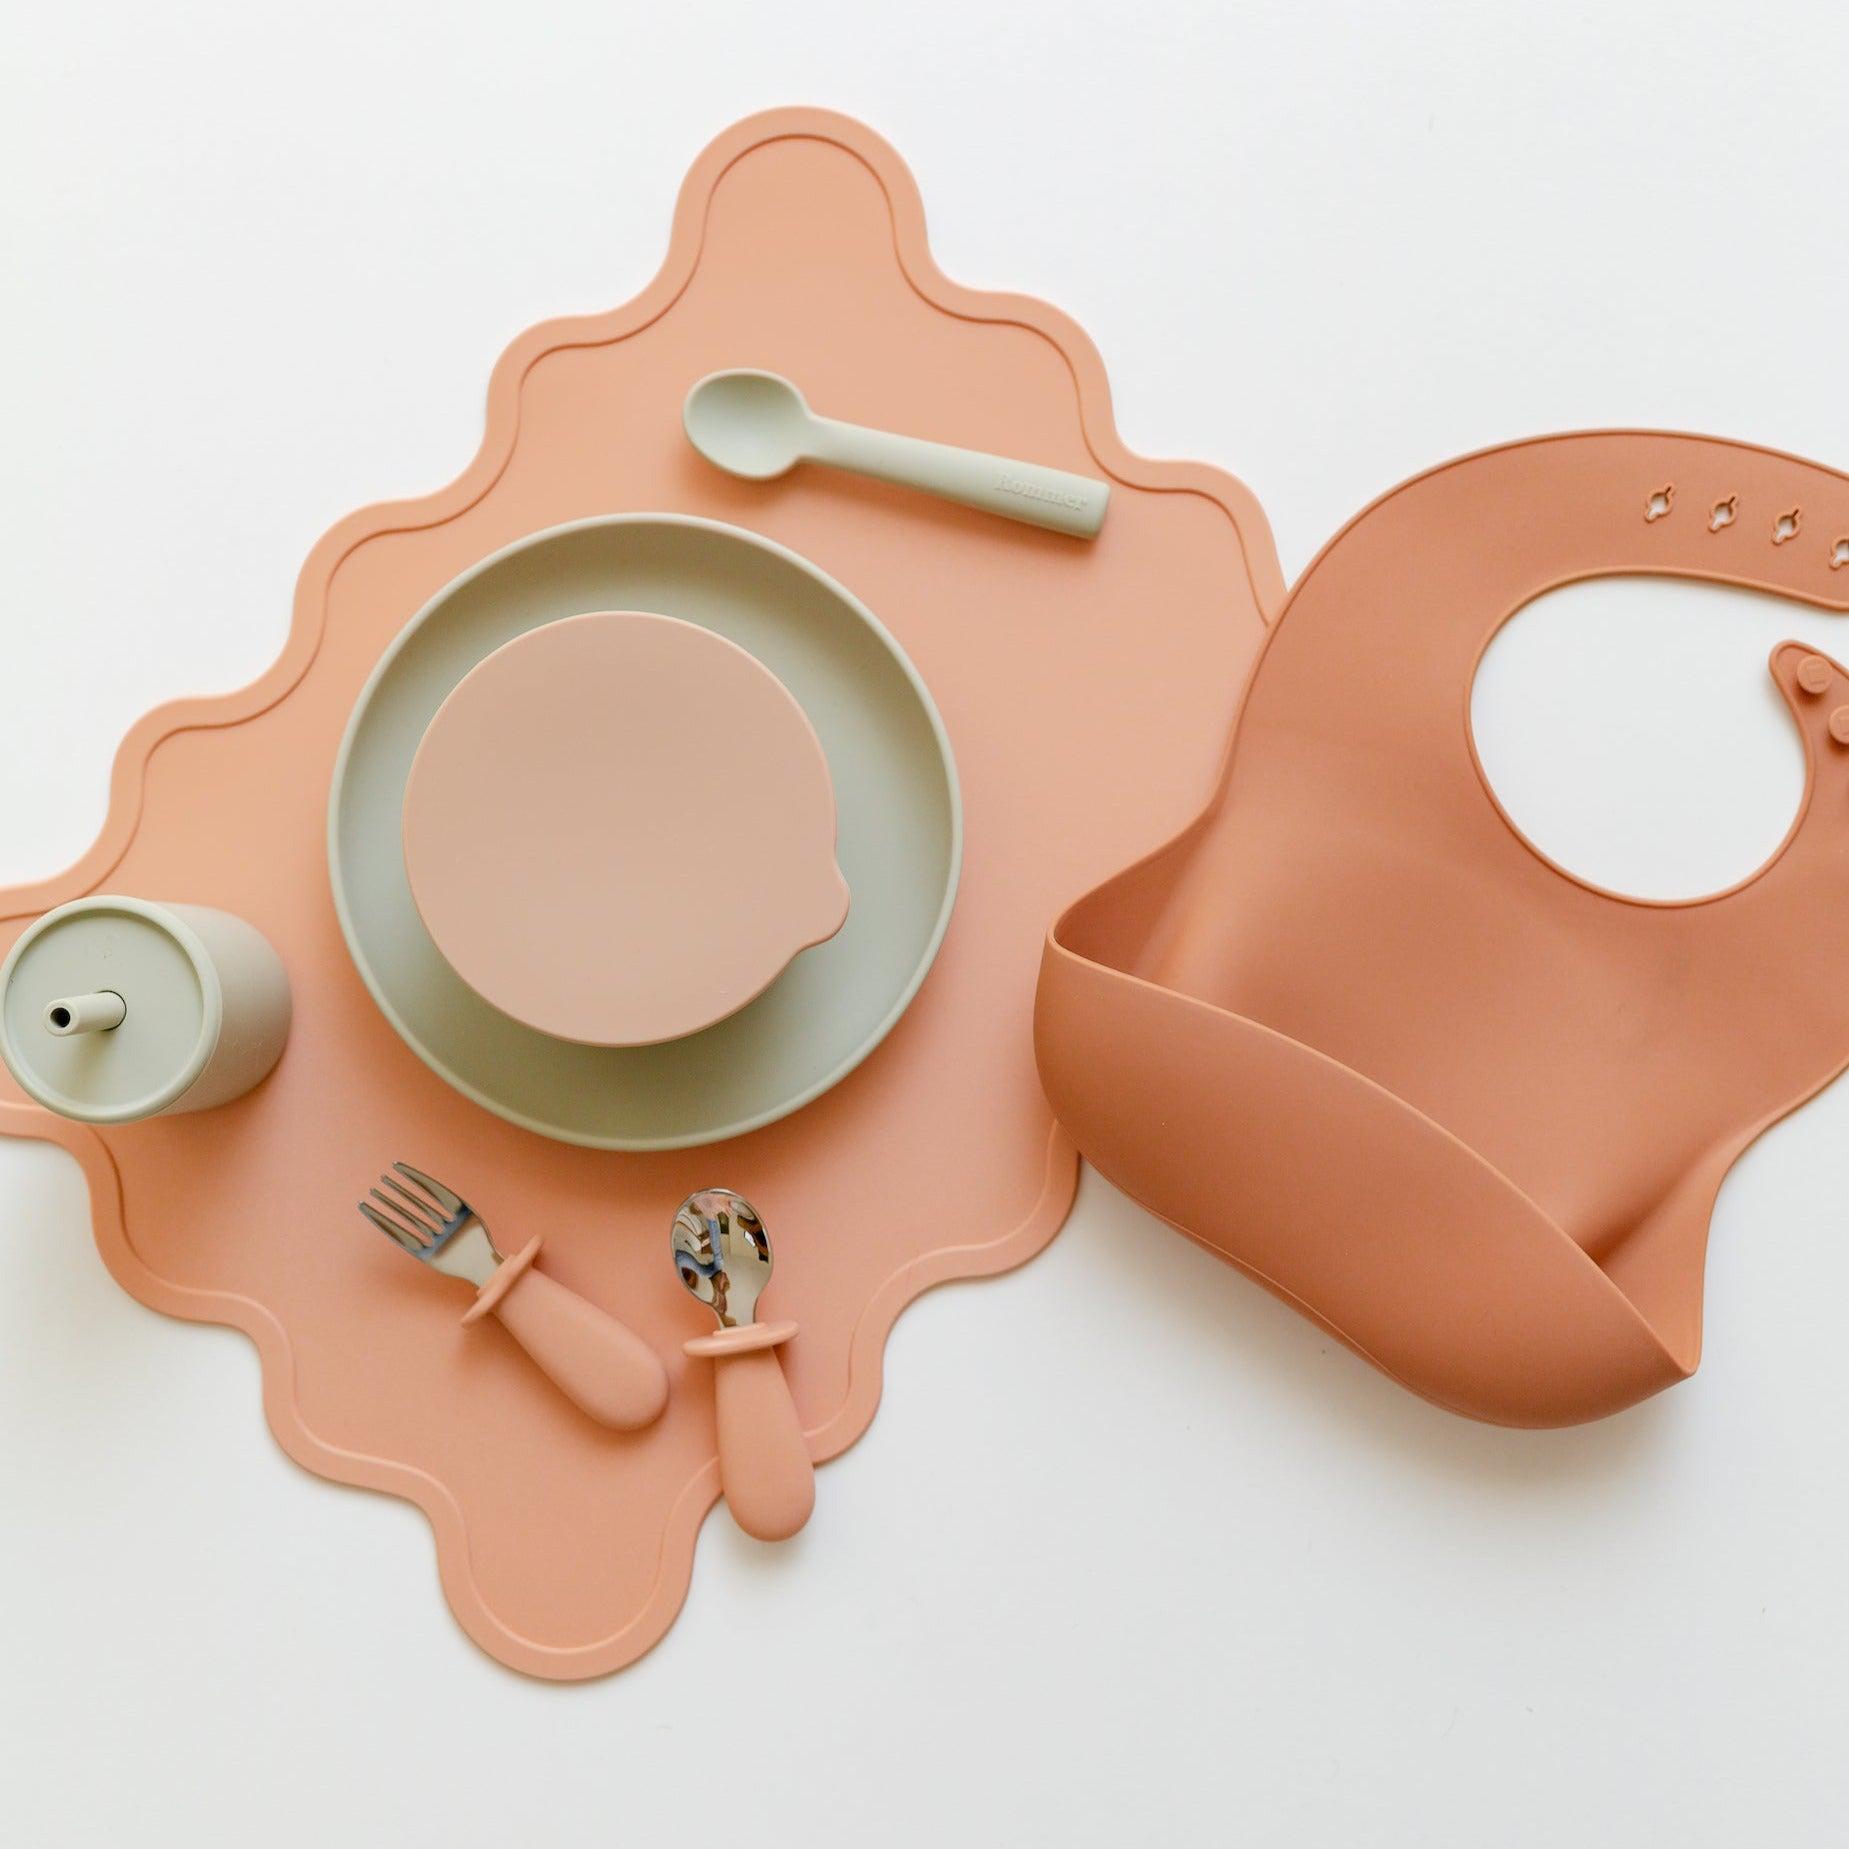 A Rommer toddler cutlery set in melon, comprising stainless steel utensils and a silicone bib.